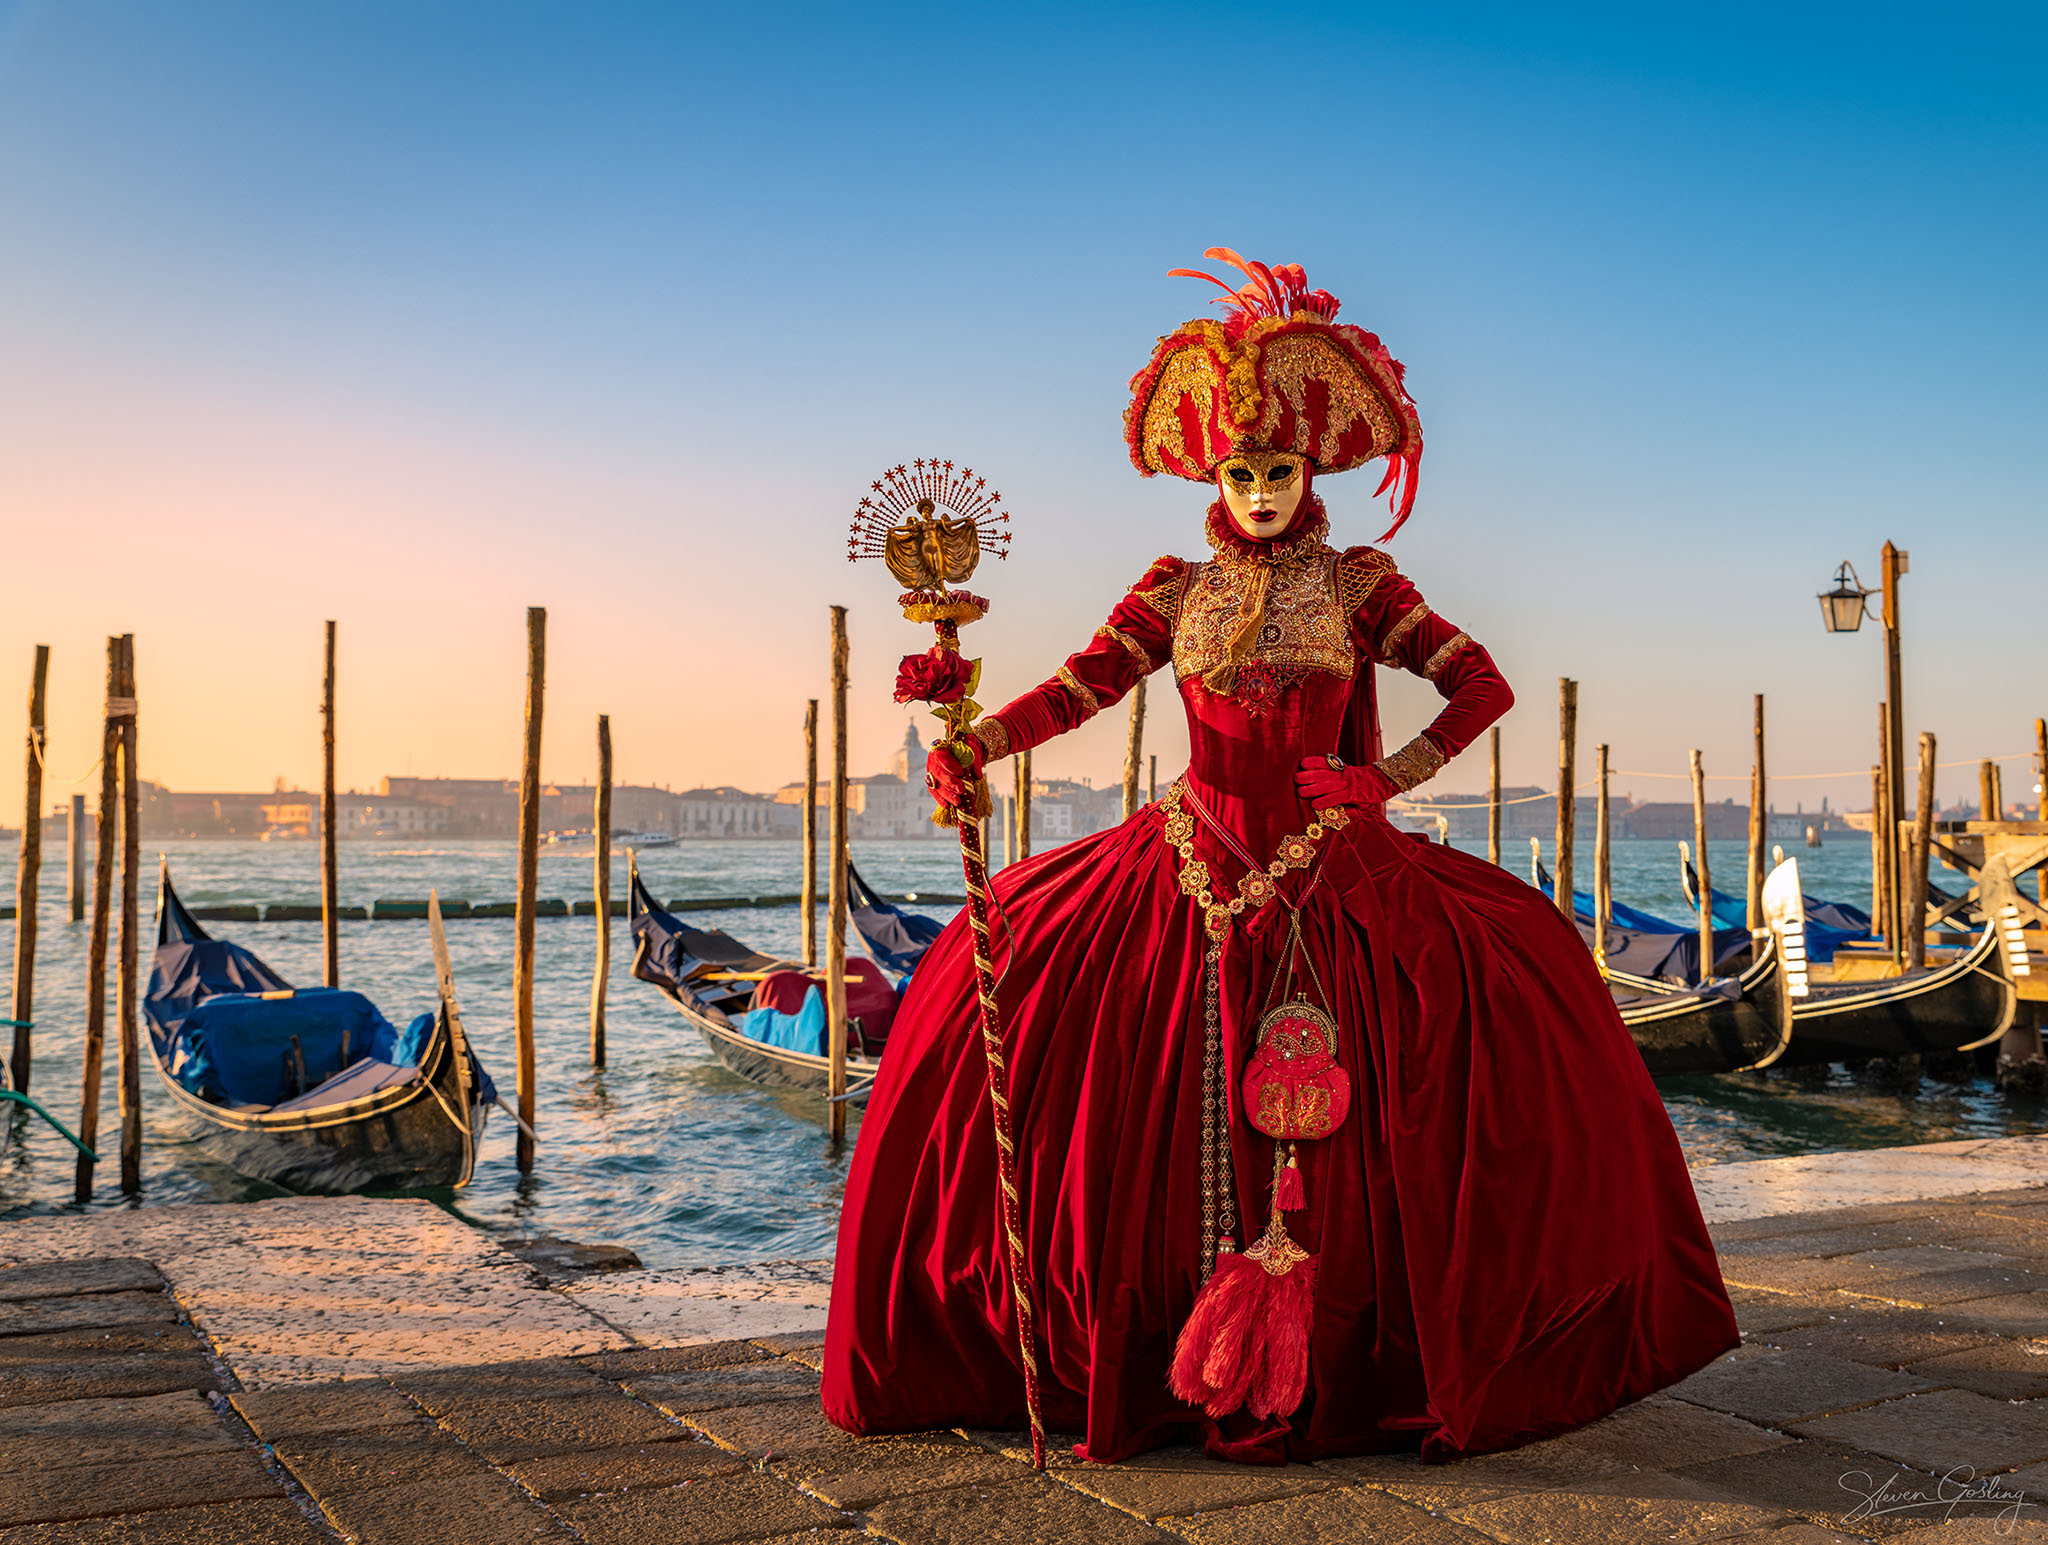 Ballet & Ball Gowns Photography Workshop at the Venice Carnival 167